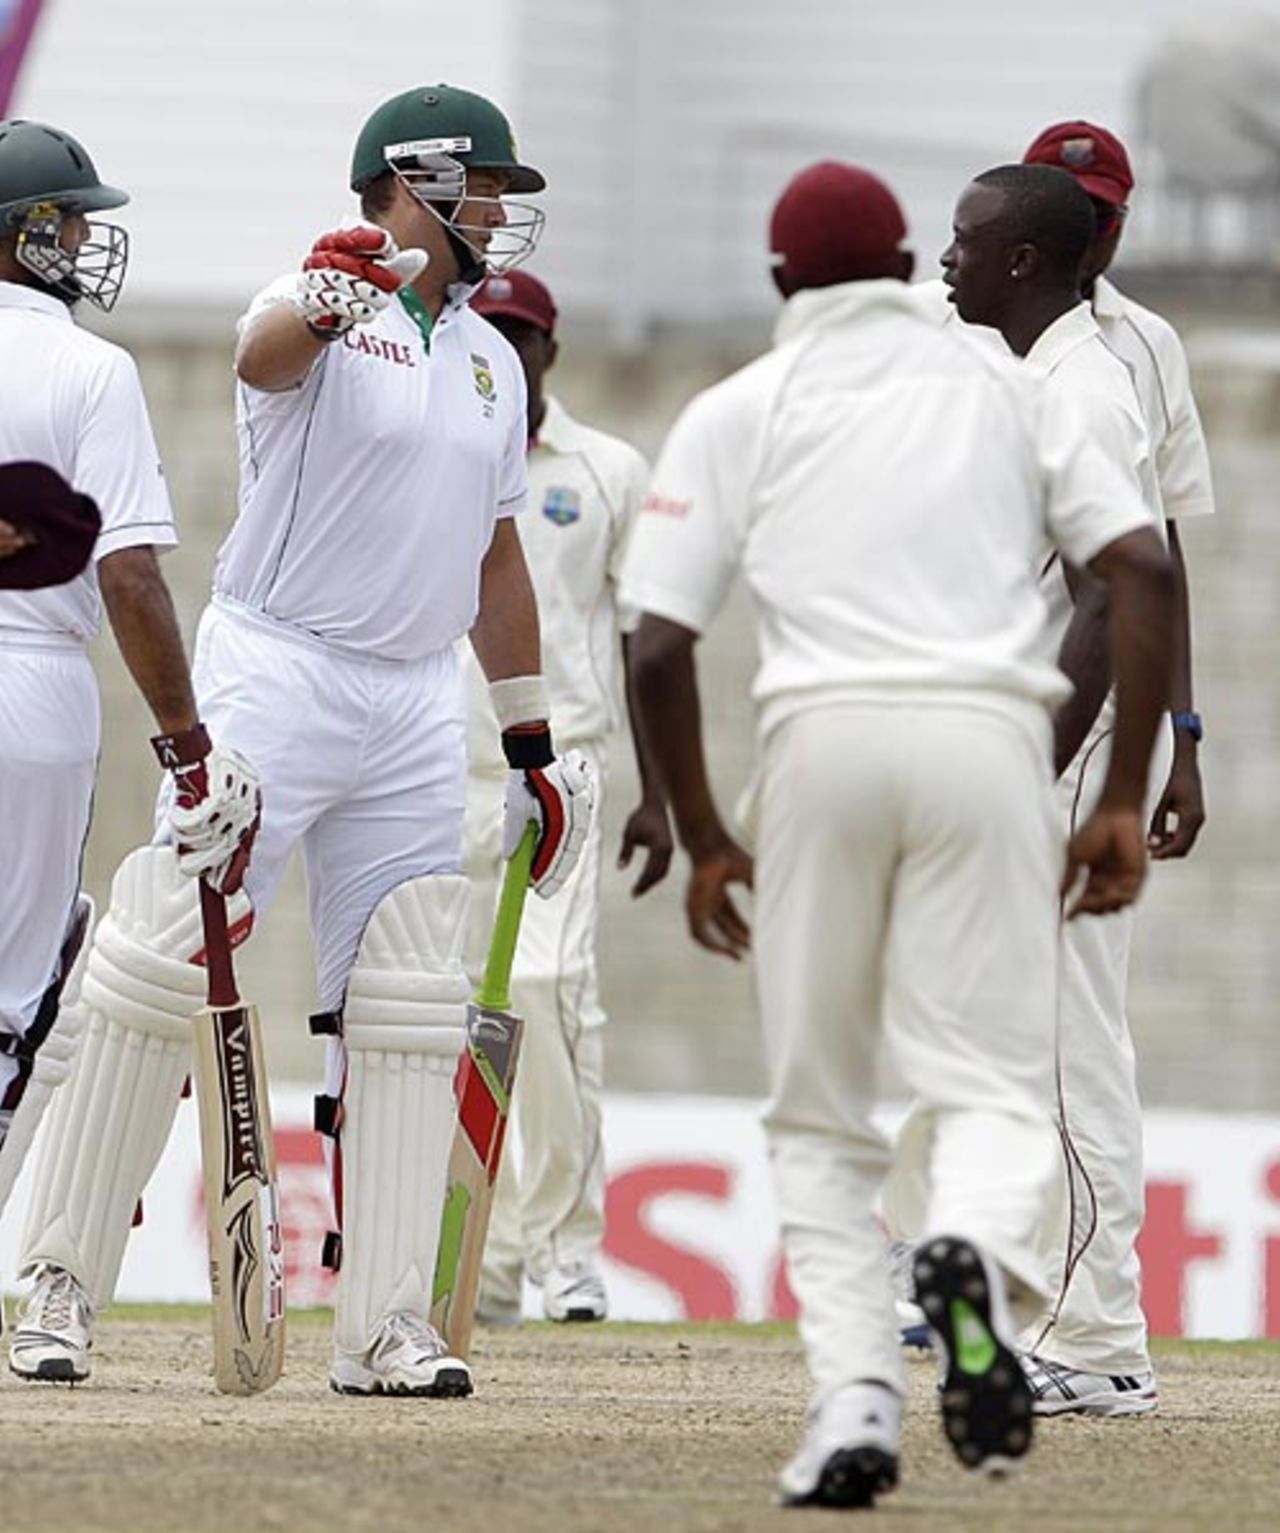 Jacques Kallis gestures to Kemar Roach, West Indies v South Africa, 3rd Test, Barbados, 4th day, June 29, 2010 